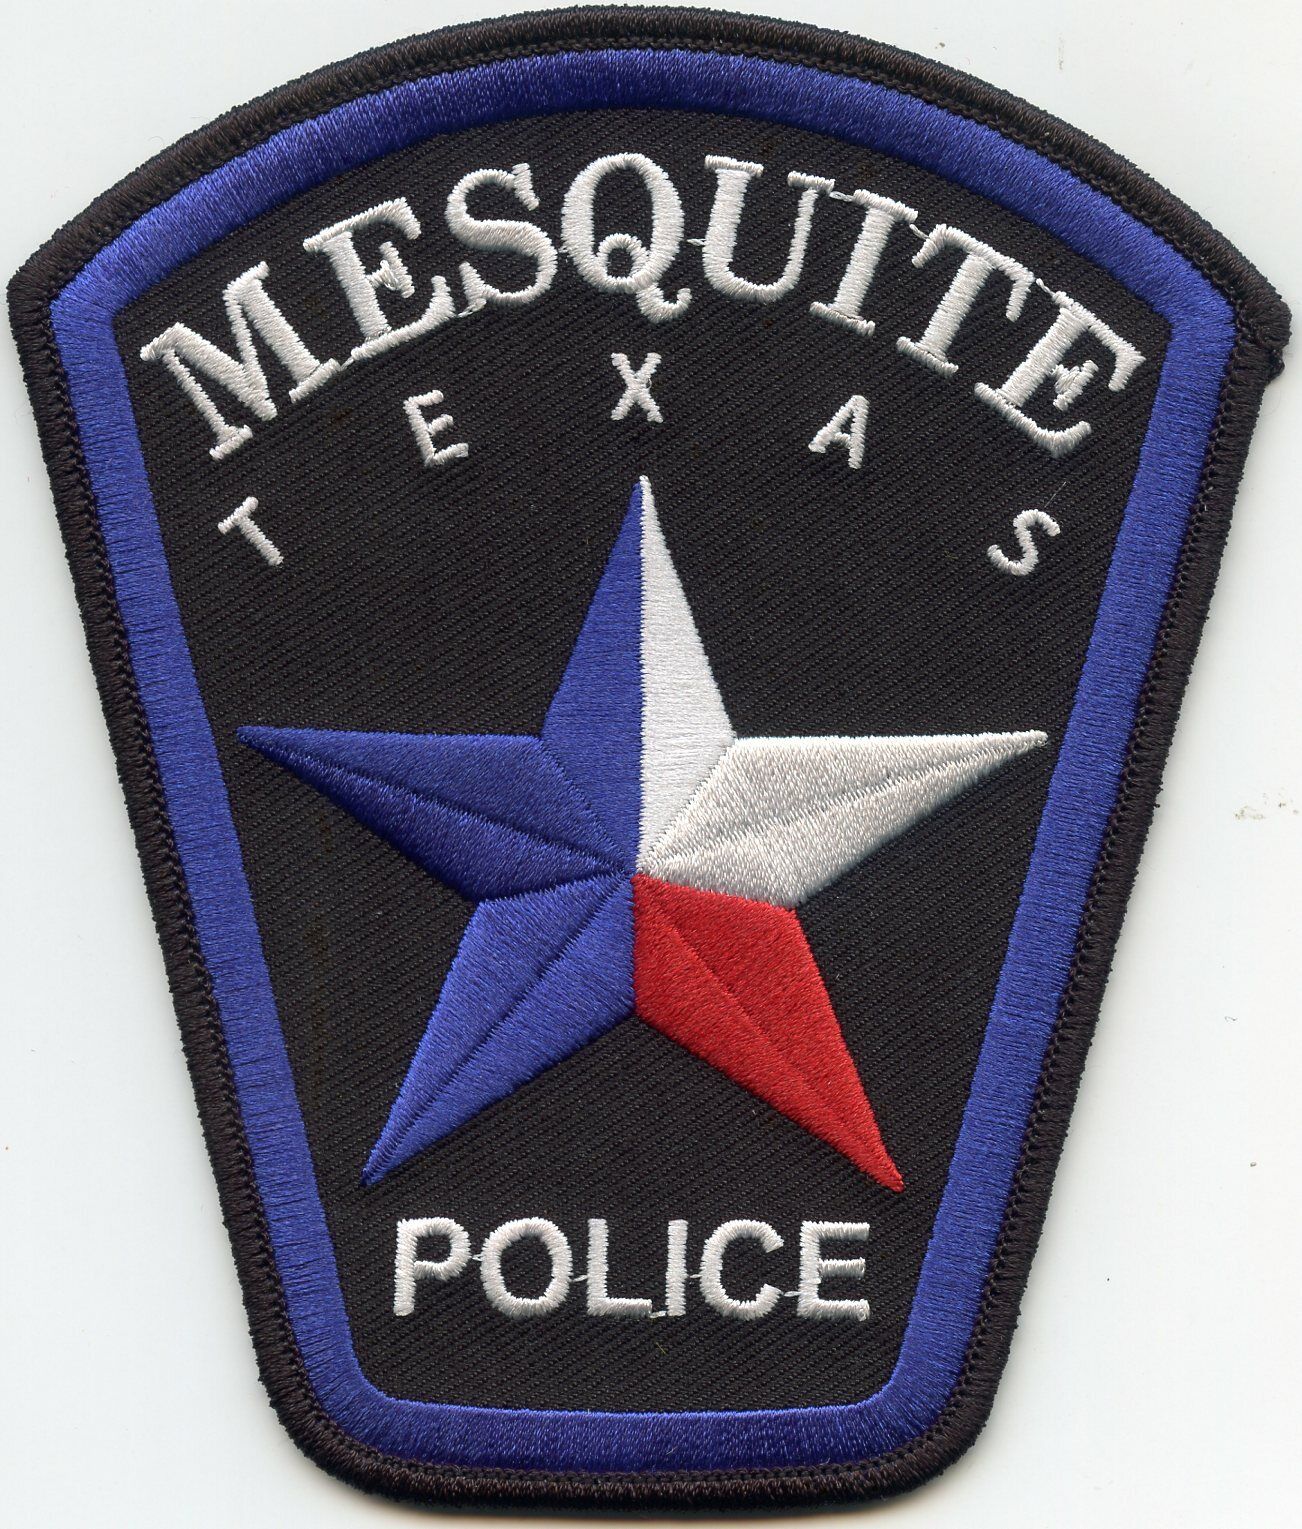 MESQUITE TEXAS TX POLICE PATCH